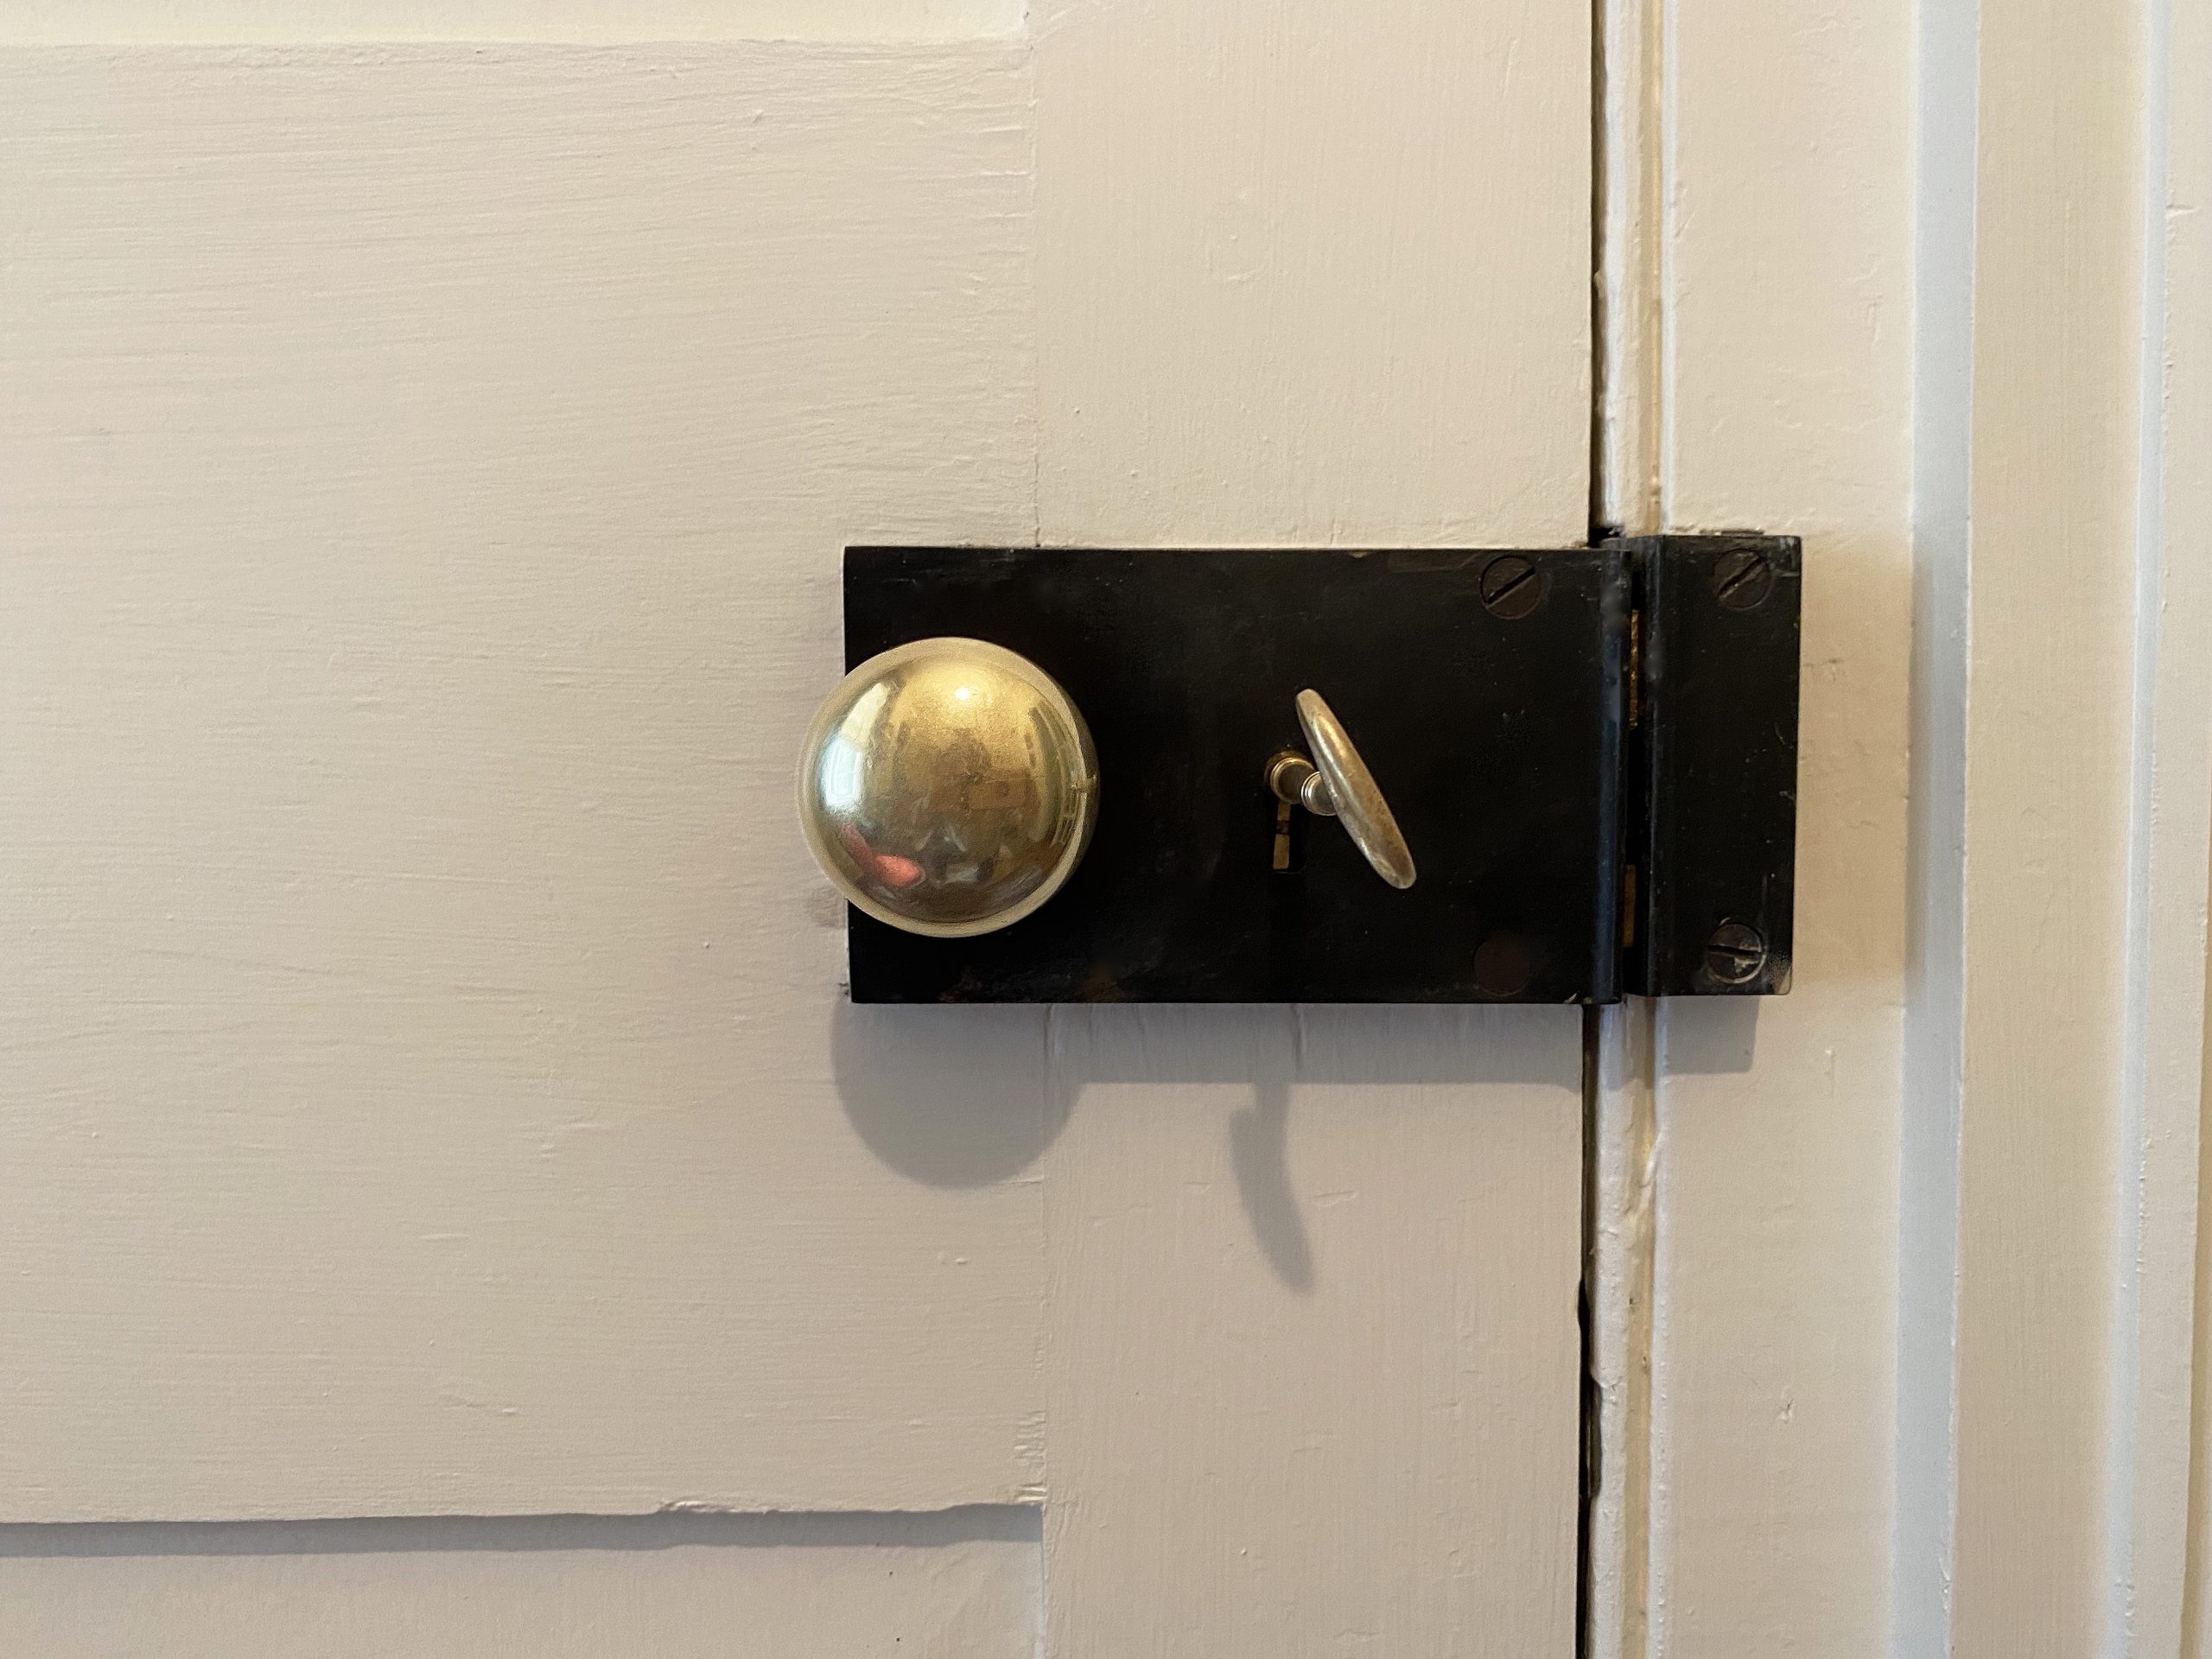 The doorknob and key in this old English lock will benefit from daily use, thus not requiring polish as often. 